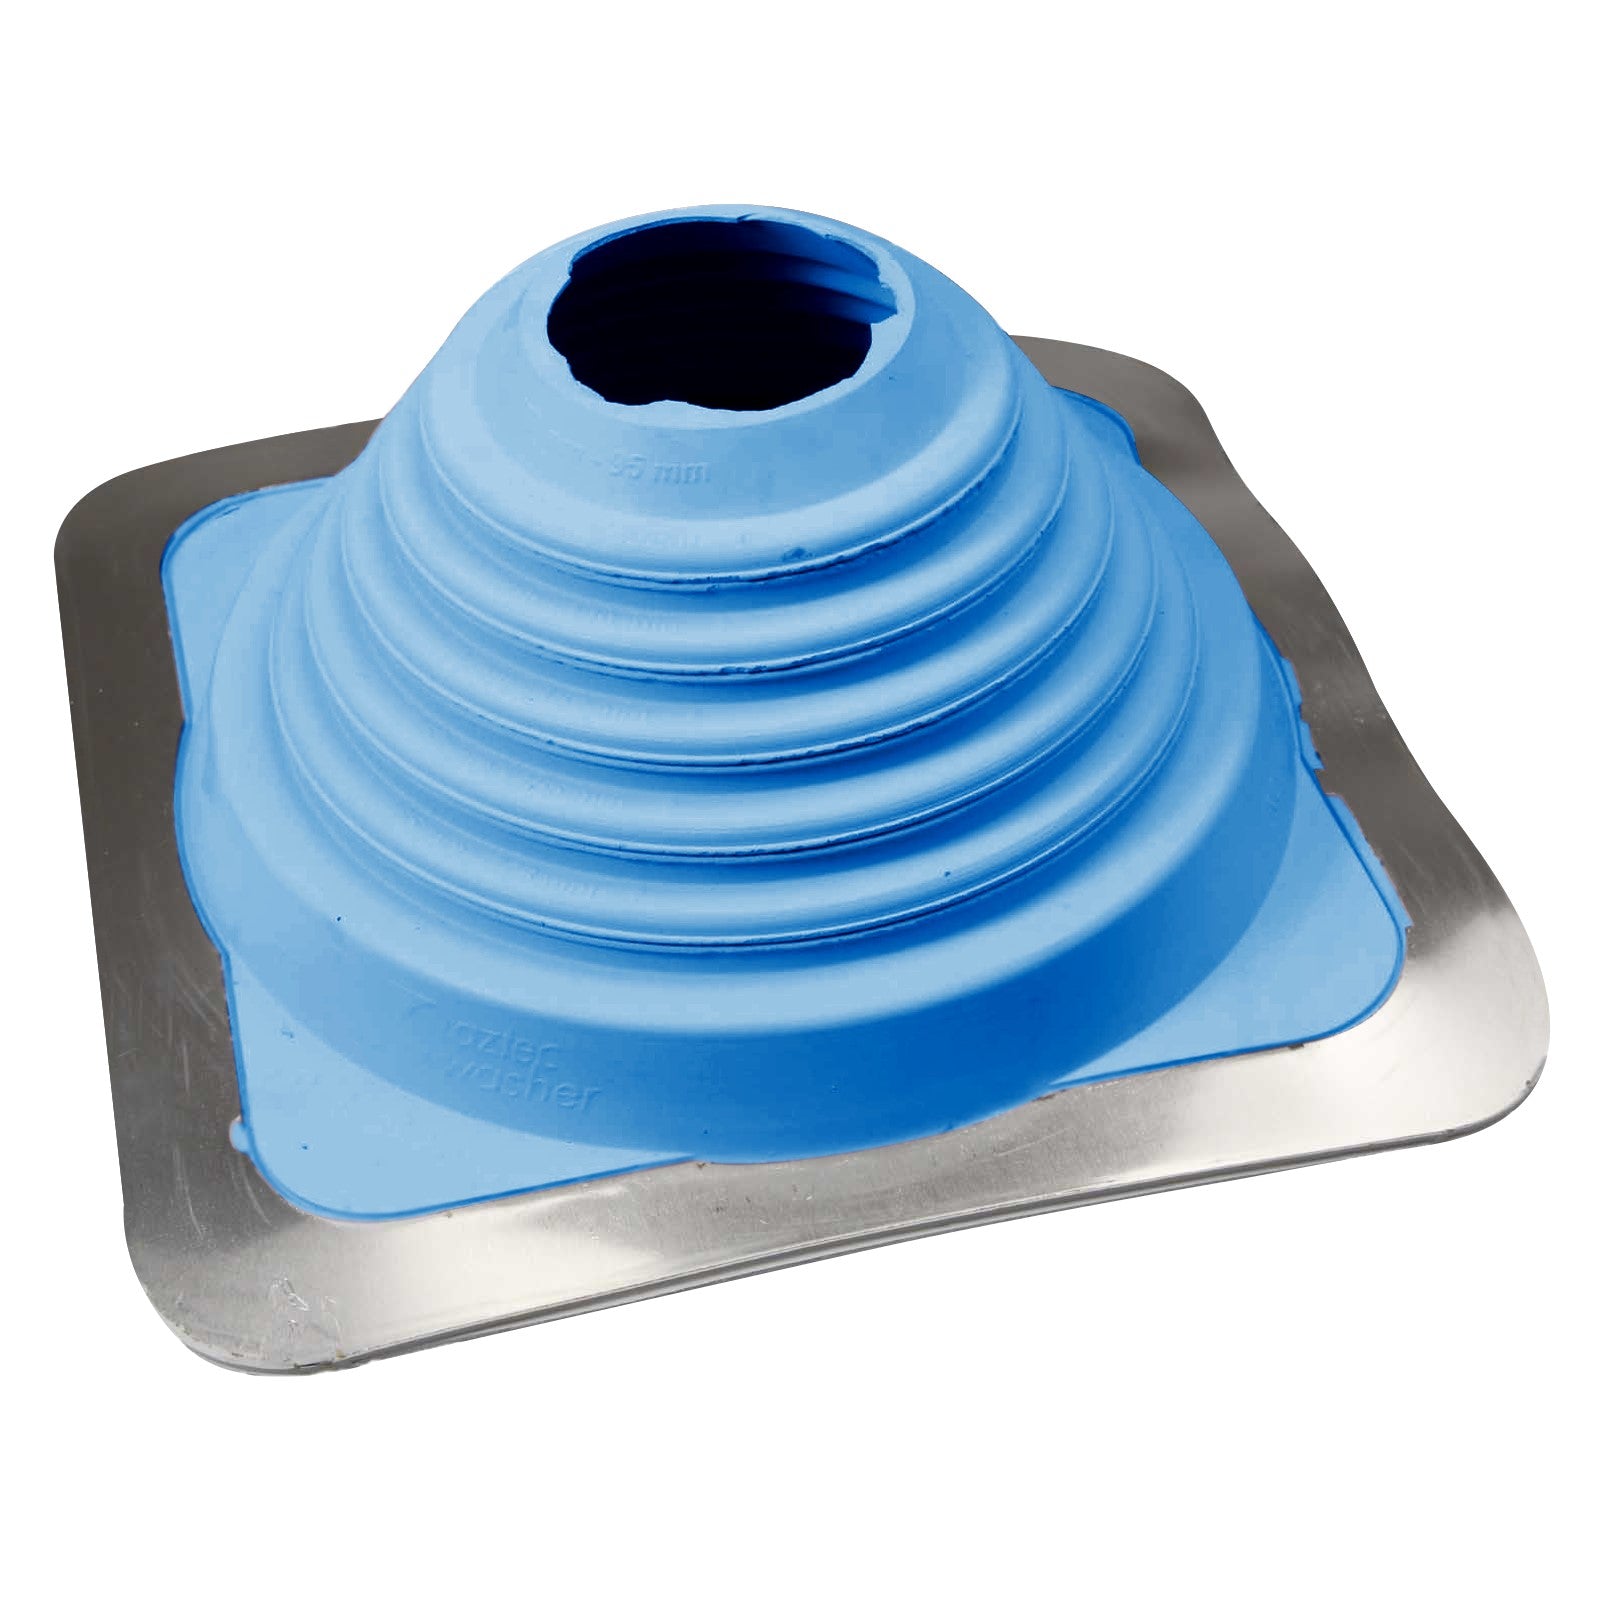 #4 Roofjack Square EPDM Pipe Flashing Boot Light Blue